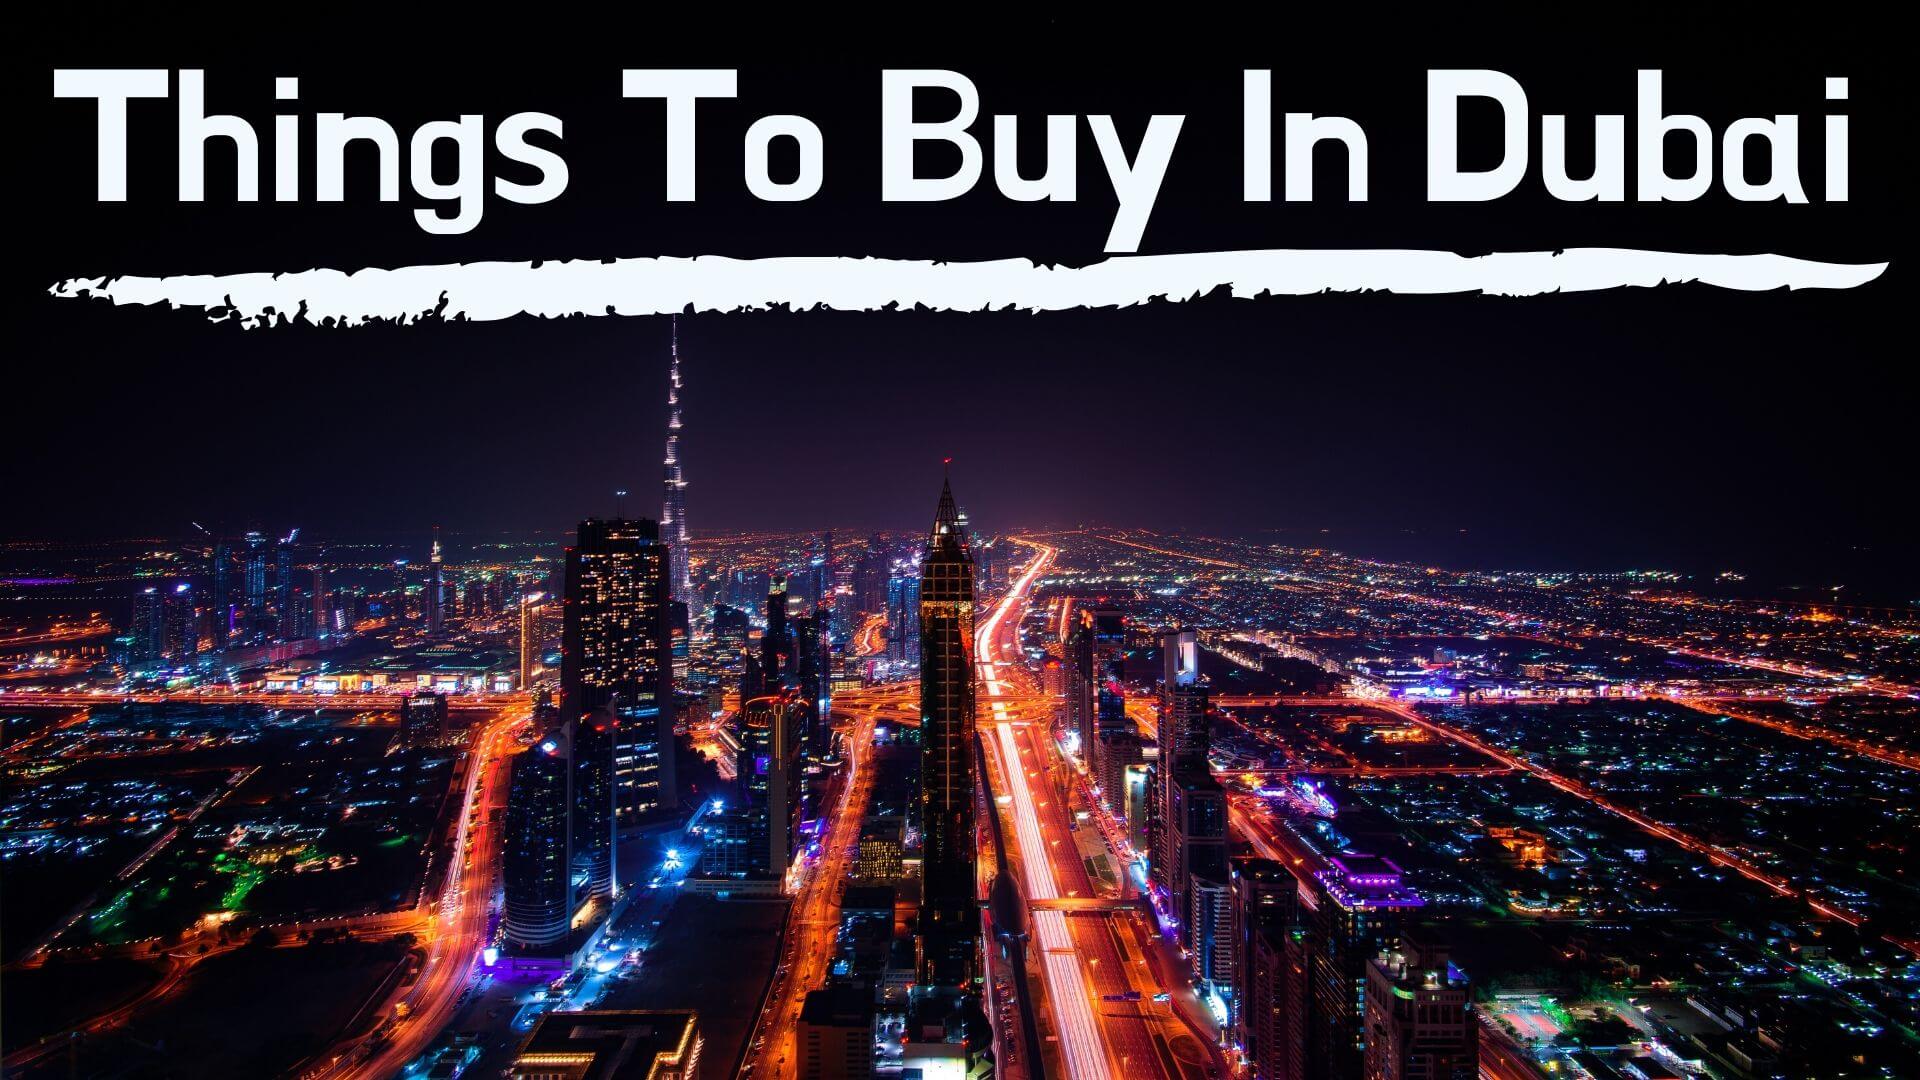 Top 15 Things to Buy in Dubai Which Could Make Your Trip Memorable